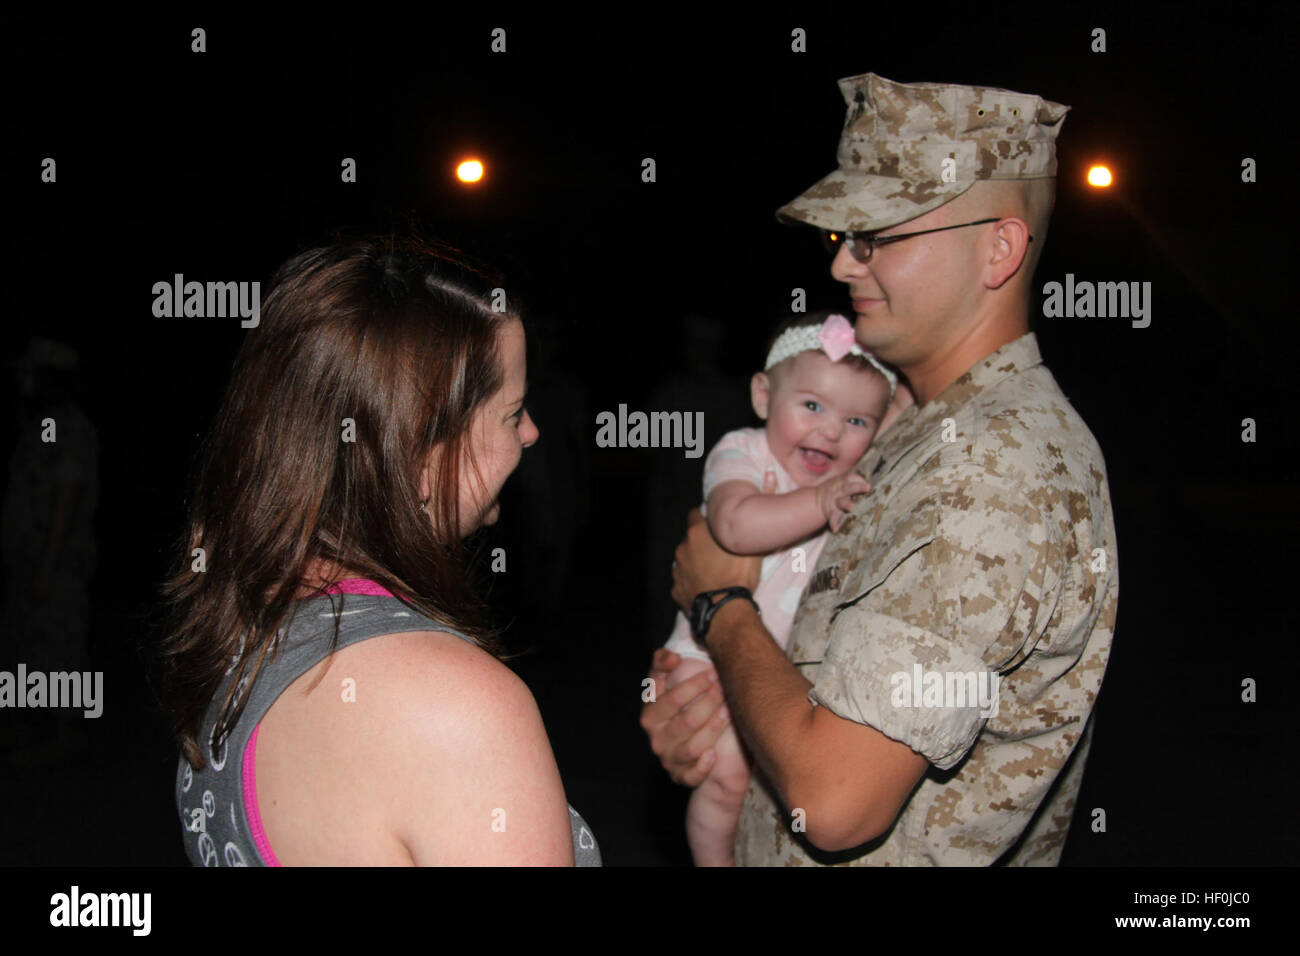 Lance Cpl. Brandon S. Hill, an air traffic control navigation aids technician with Marine Air Control Squadron 2, hugs his 5-month-old daughter Mackenzie while his wife Casey talks to him before leaving with Marine Air Communication Squadron 2 to the Aerial Point of Embarkation to fly to Afghanistan for a seven month deployment, Aug. 11. More than 200 Marines are heading out to Afghanistan for various missions under the command of Marine Air Control Group 28. The only squadron that falls under MACG-28 here in garrison that isn’t deploying with the group is Marine Unmanned Aerial Vehicle Squadr Stock Photo